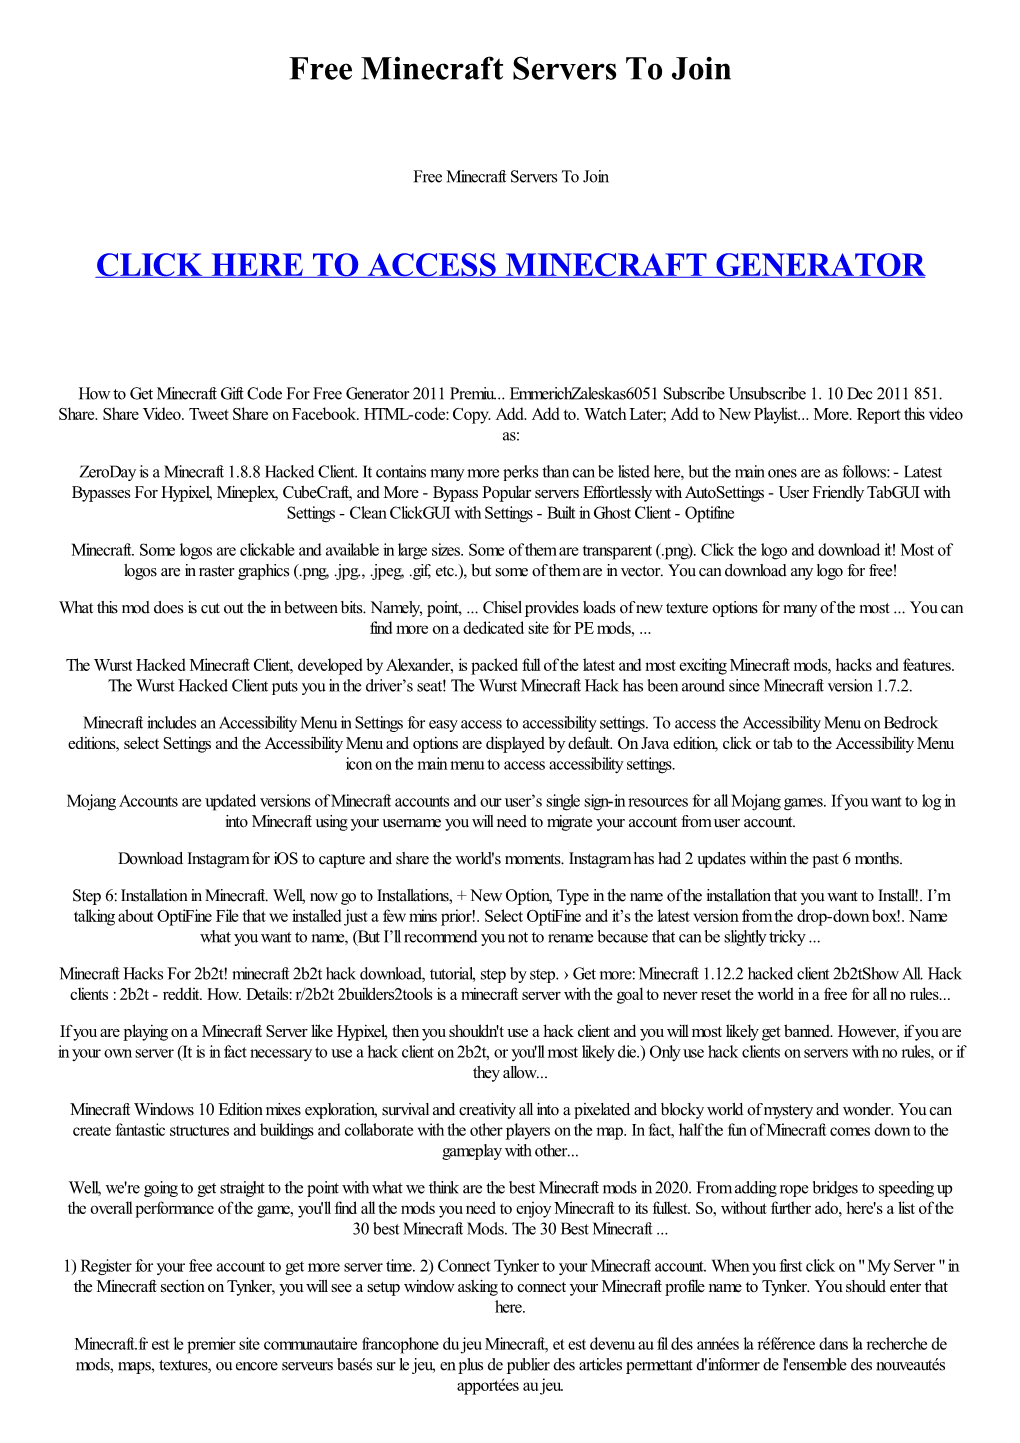 Free Minecraft Servers to Join